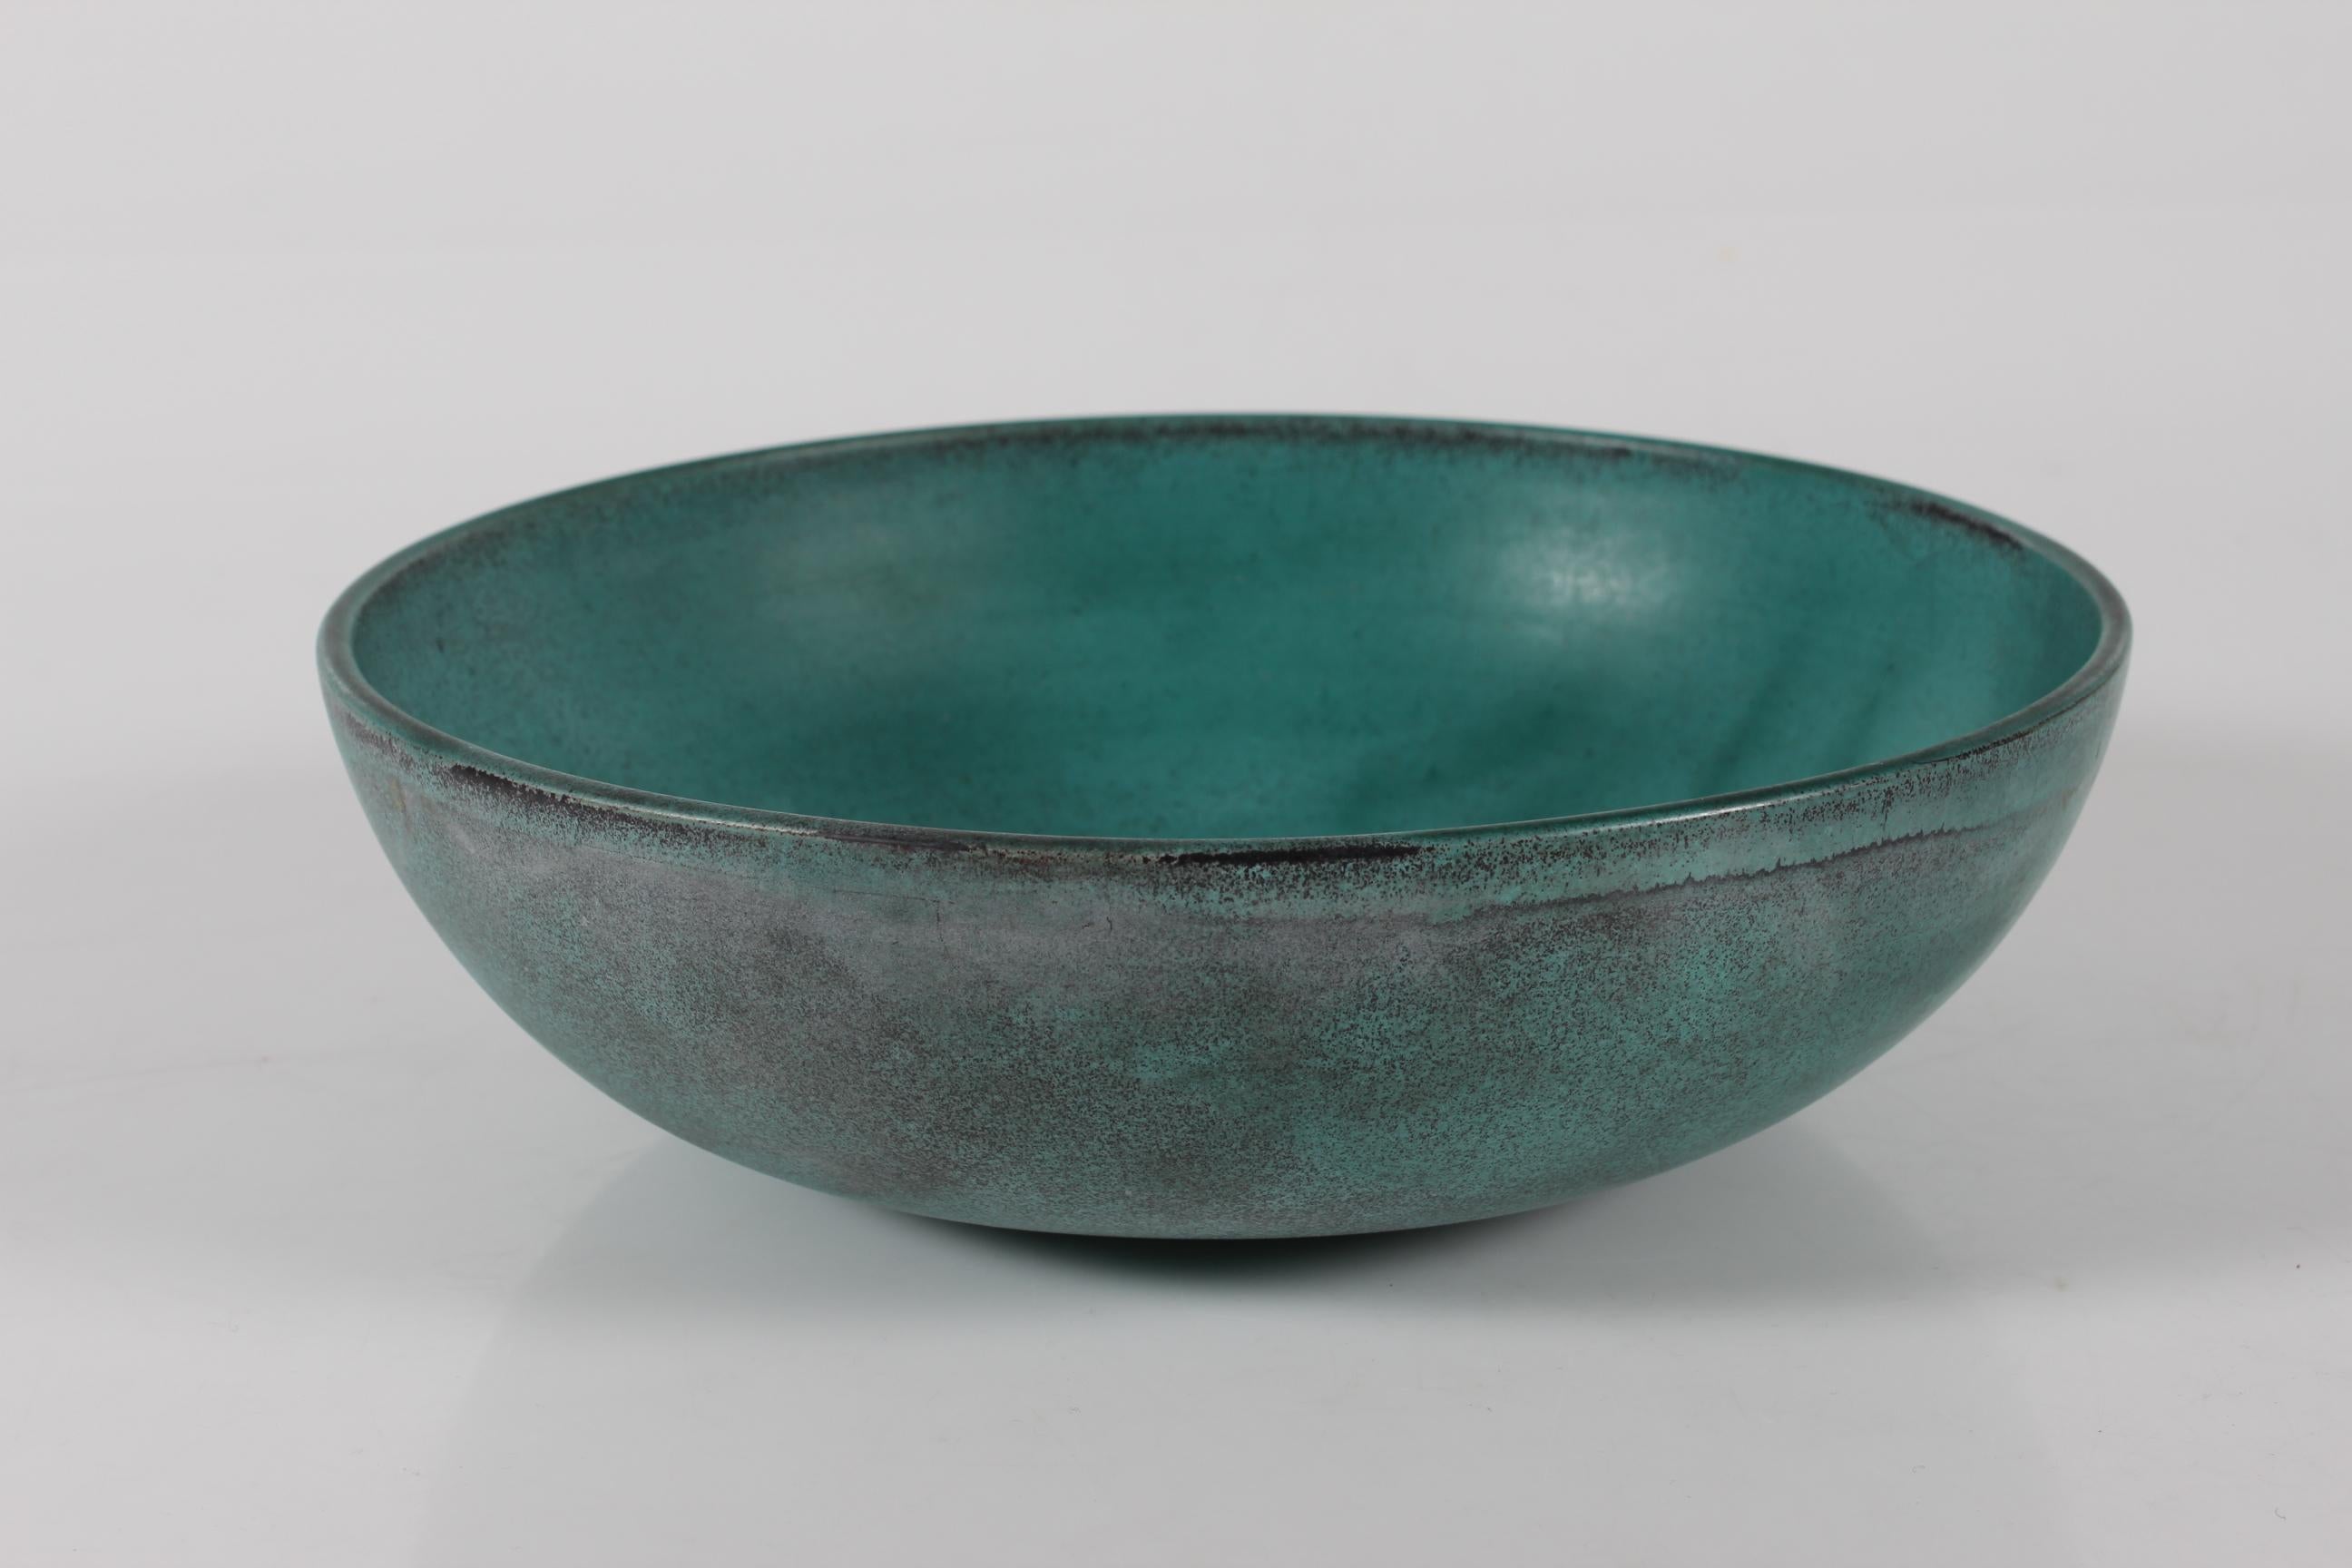 Round Art Deco ceramic bowl made by Nils Kähler in the 1940s for the pottery workshop Kähler in Næstved, Denmark.

The bowl is decorated with smooth  verdigris green glaze with a touch of black.

Marked: HAK 

Very good condition without repairs or